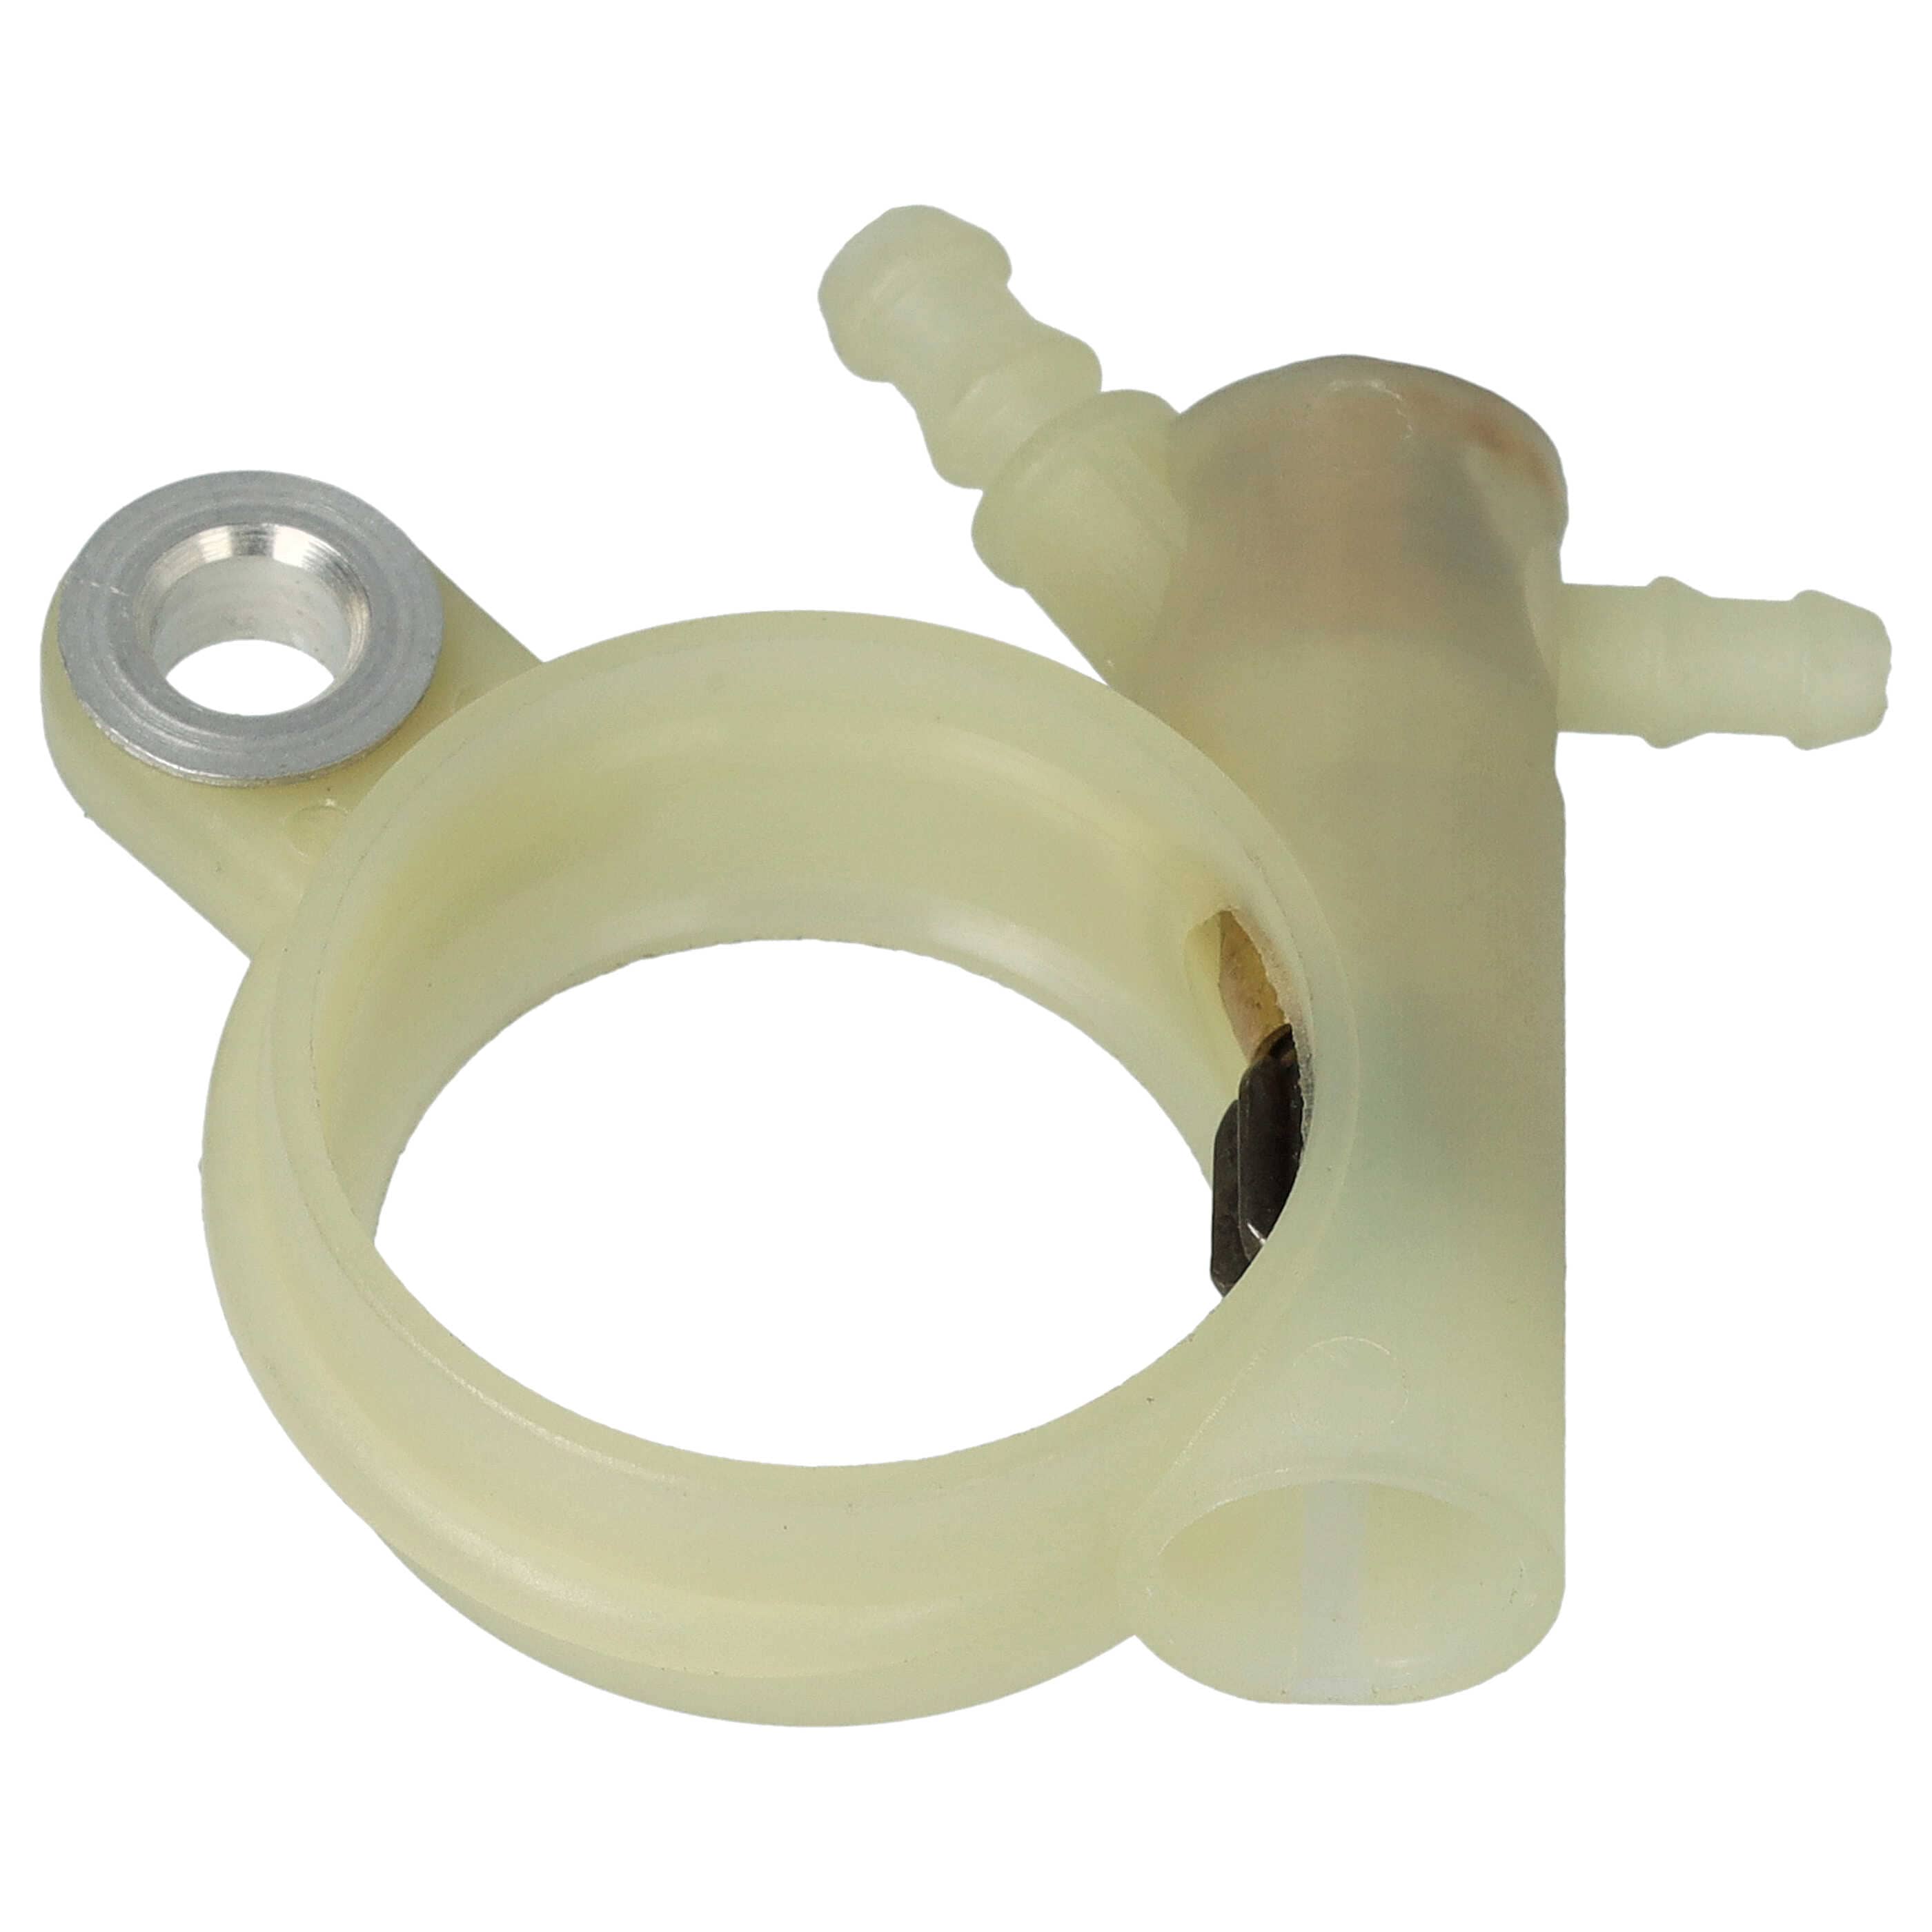 Oil Pump as Replacement for Stihl 1143 640 3201 - plastic / iron, 4.9 x 4.7 x 1.1 cm, Adjustable 